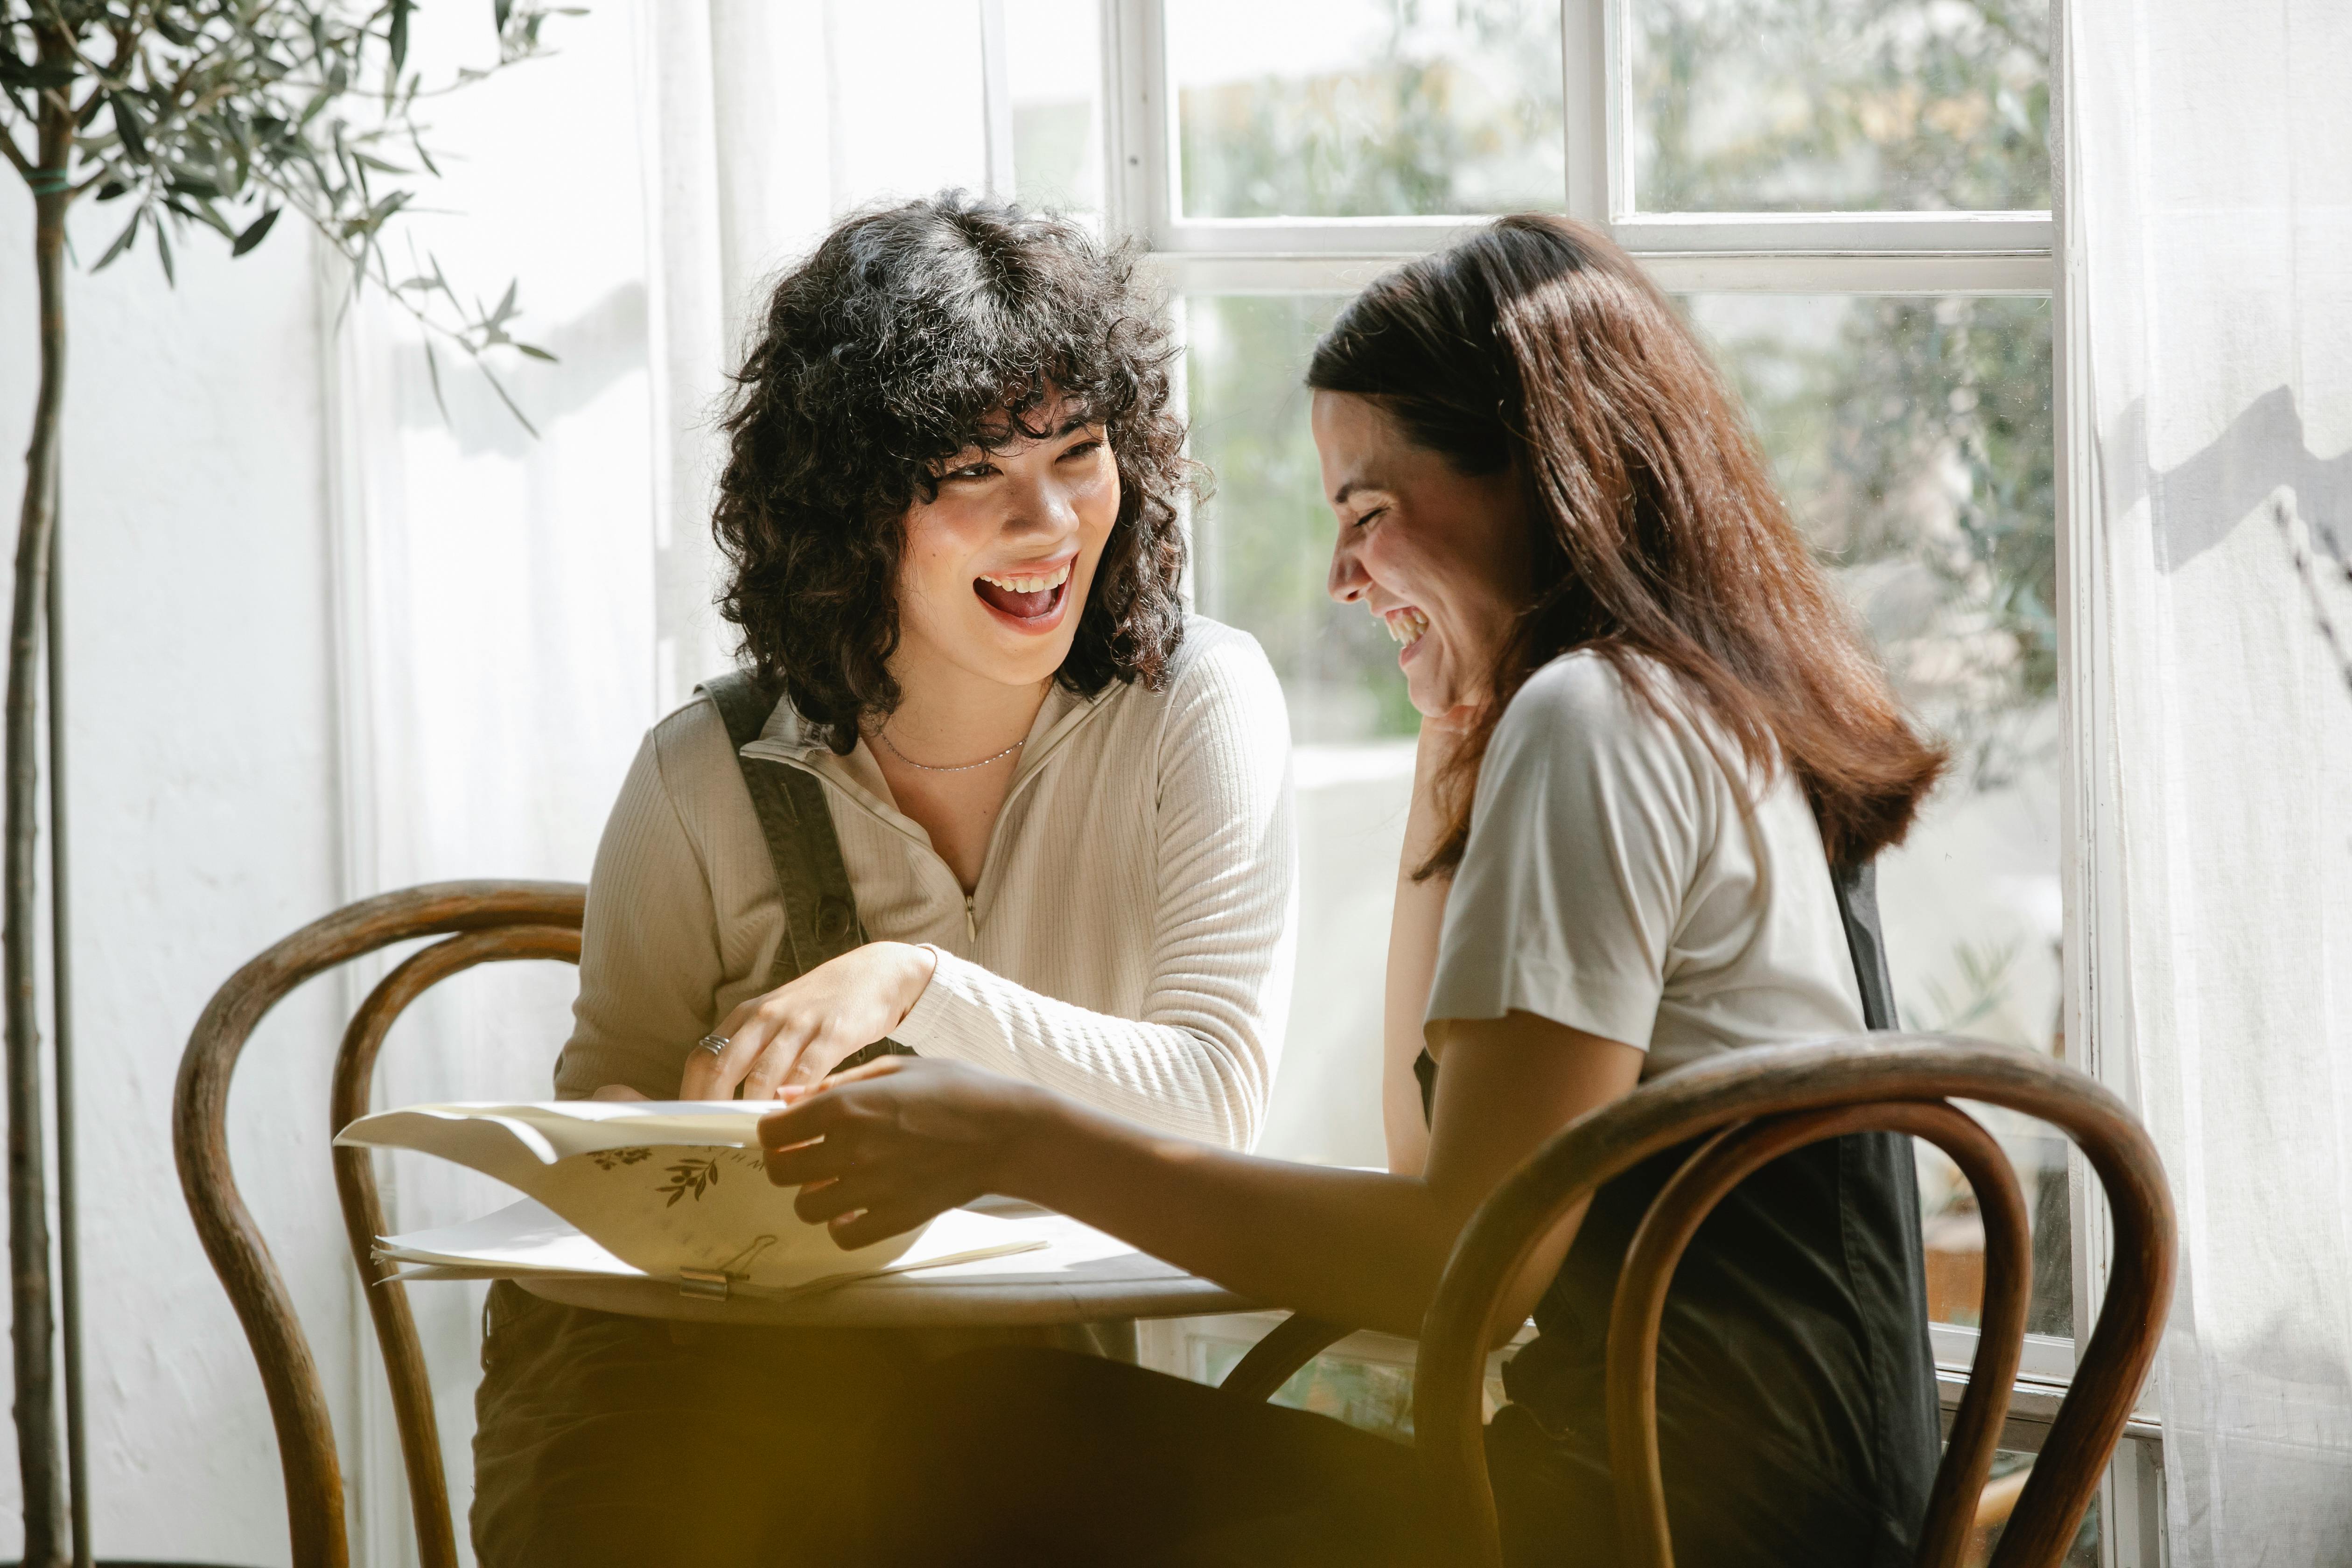 Two women laughing while looking at paperwork | Source: Pexels